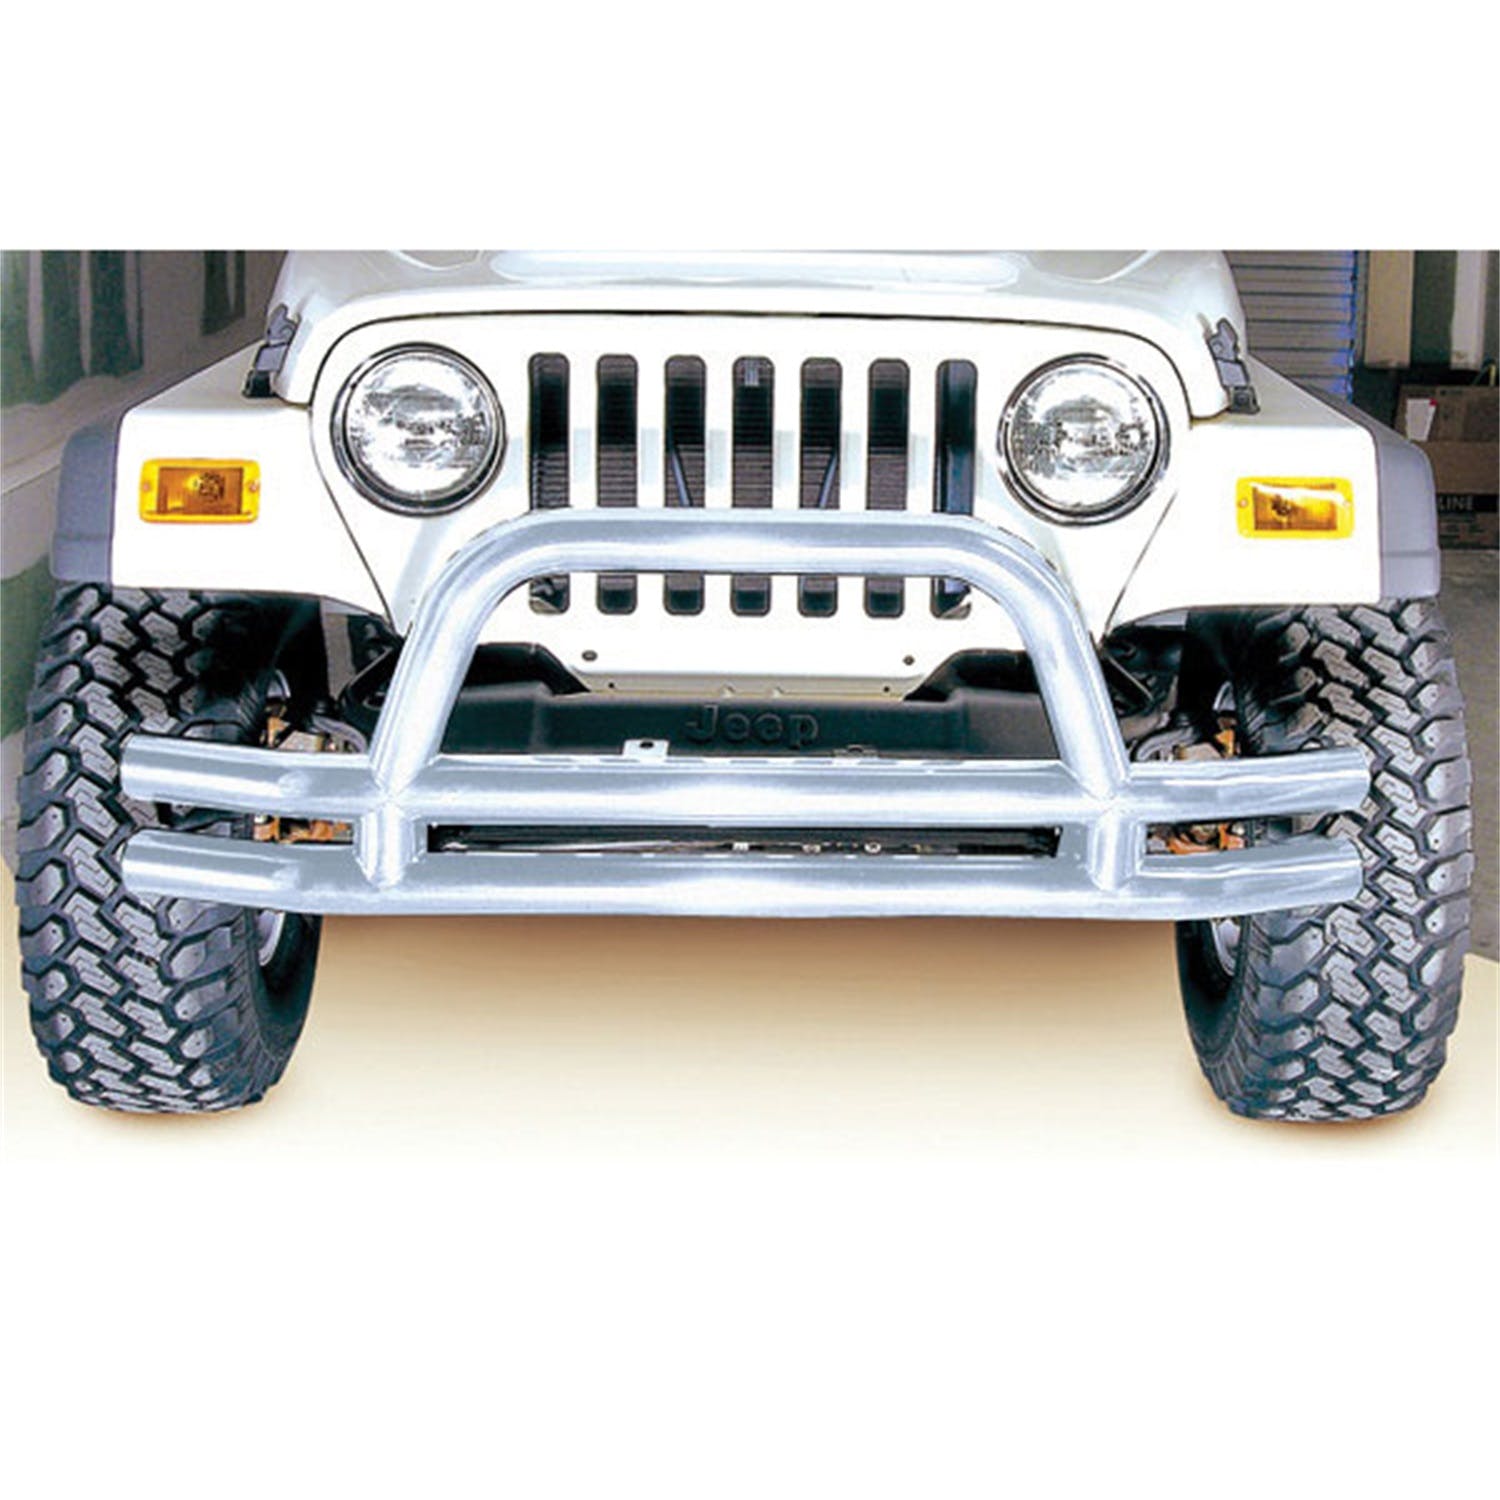 Rugged Ridge 11563.01 Double Tube Front Bumper, 3 Inch, Stainless Steel